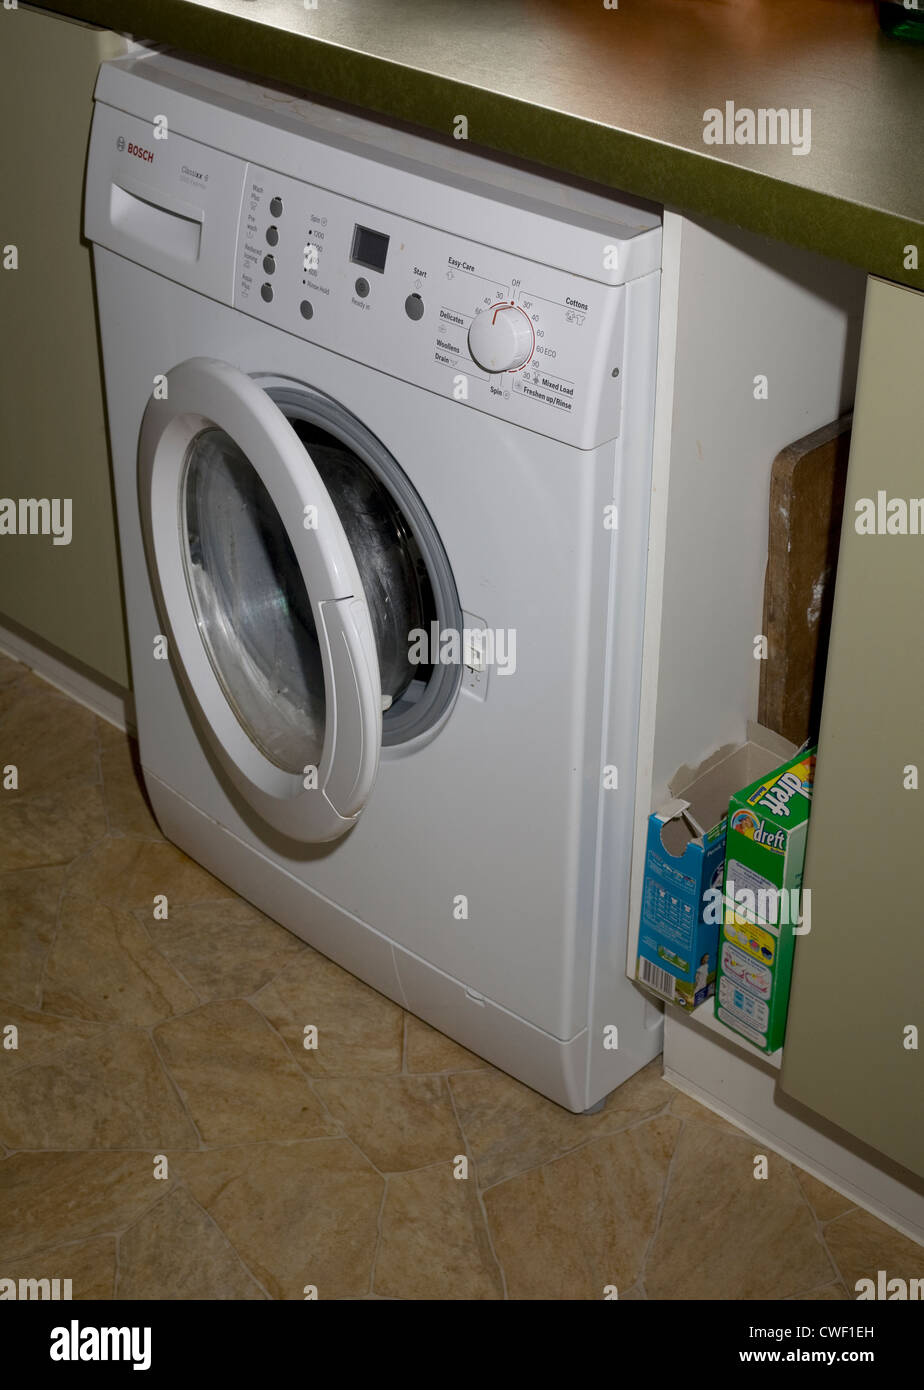 A Bosch 1200 express washing machine neatly tucked under a kitchen surface  with a box of Dreft detergent nearby Stock Photo - Alamy